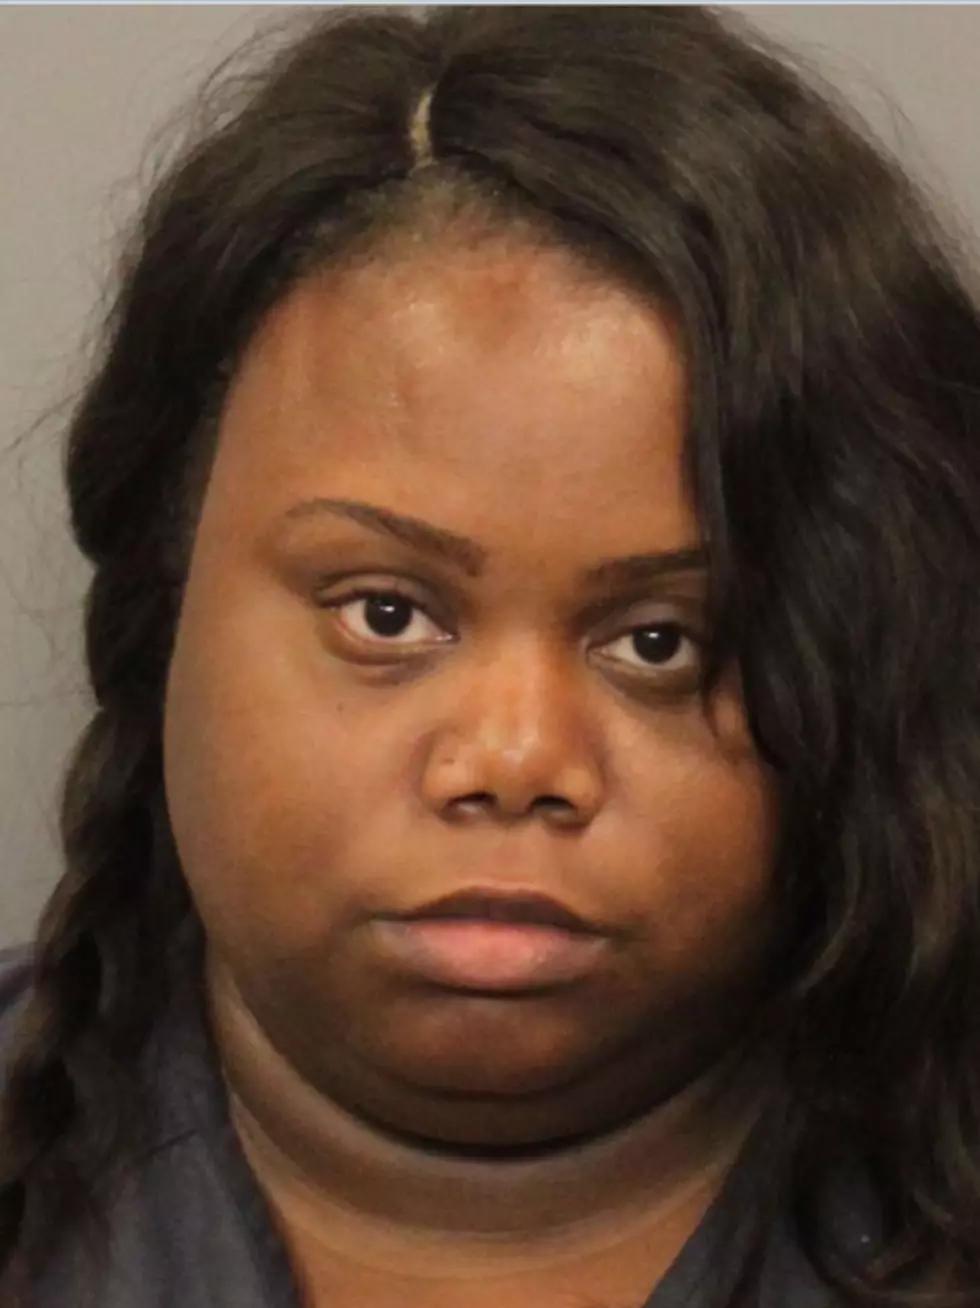 Atlanta Mom Accused of Hiring CraigsList Stranger to Drive With Her Son to Florida